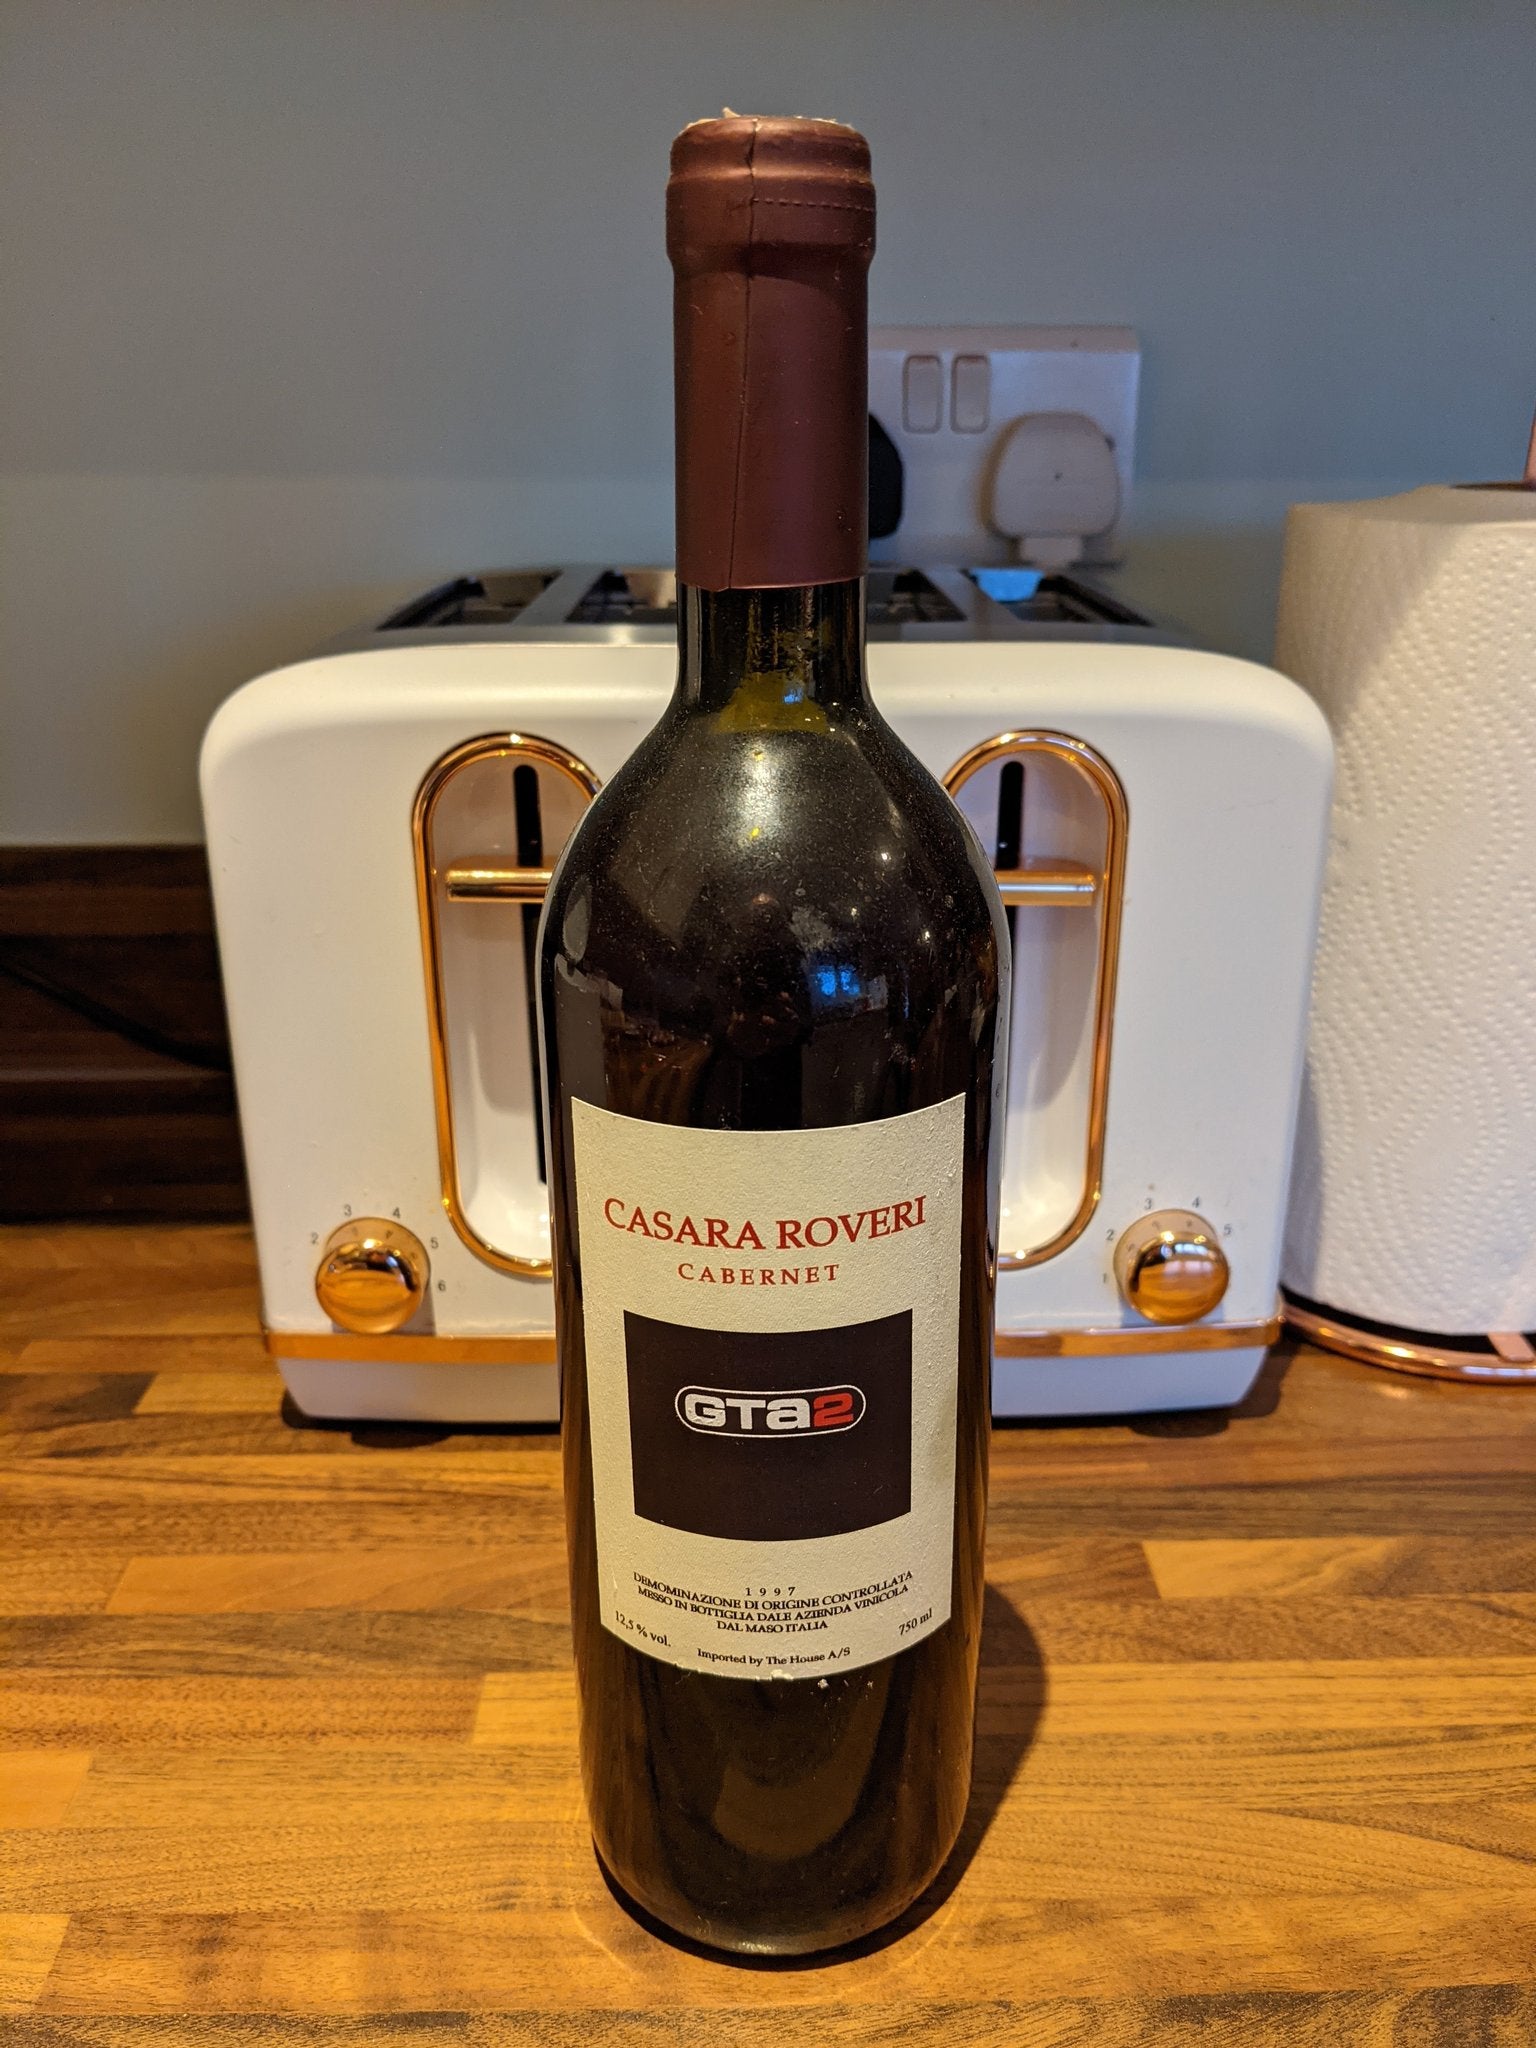 Image for GTA 2 got its own branded wine, and this bottle has never been opened 21 years later